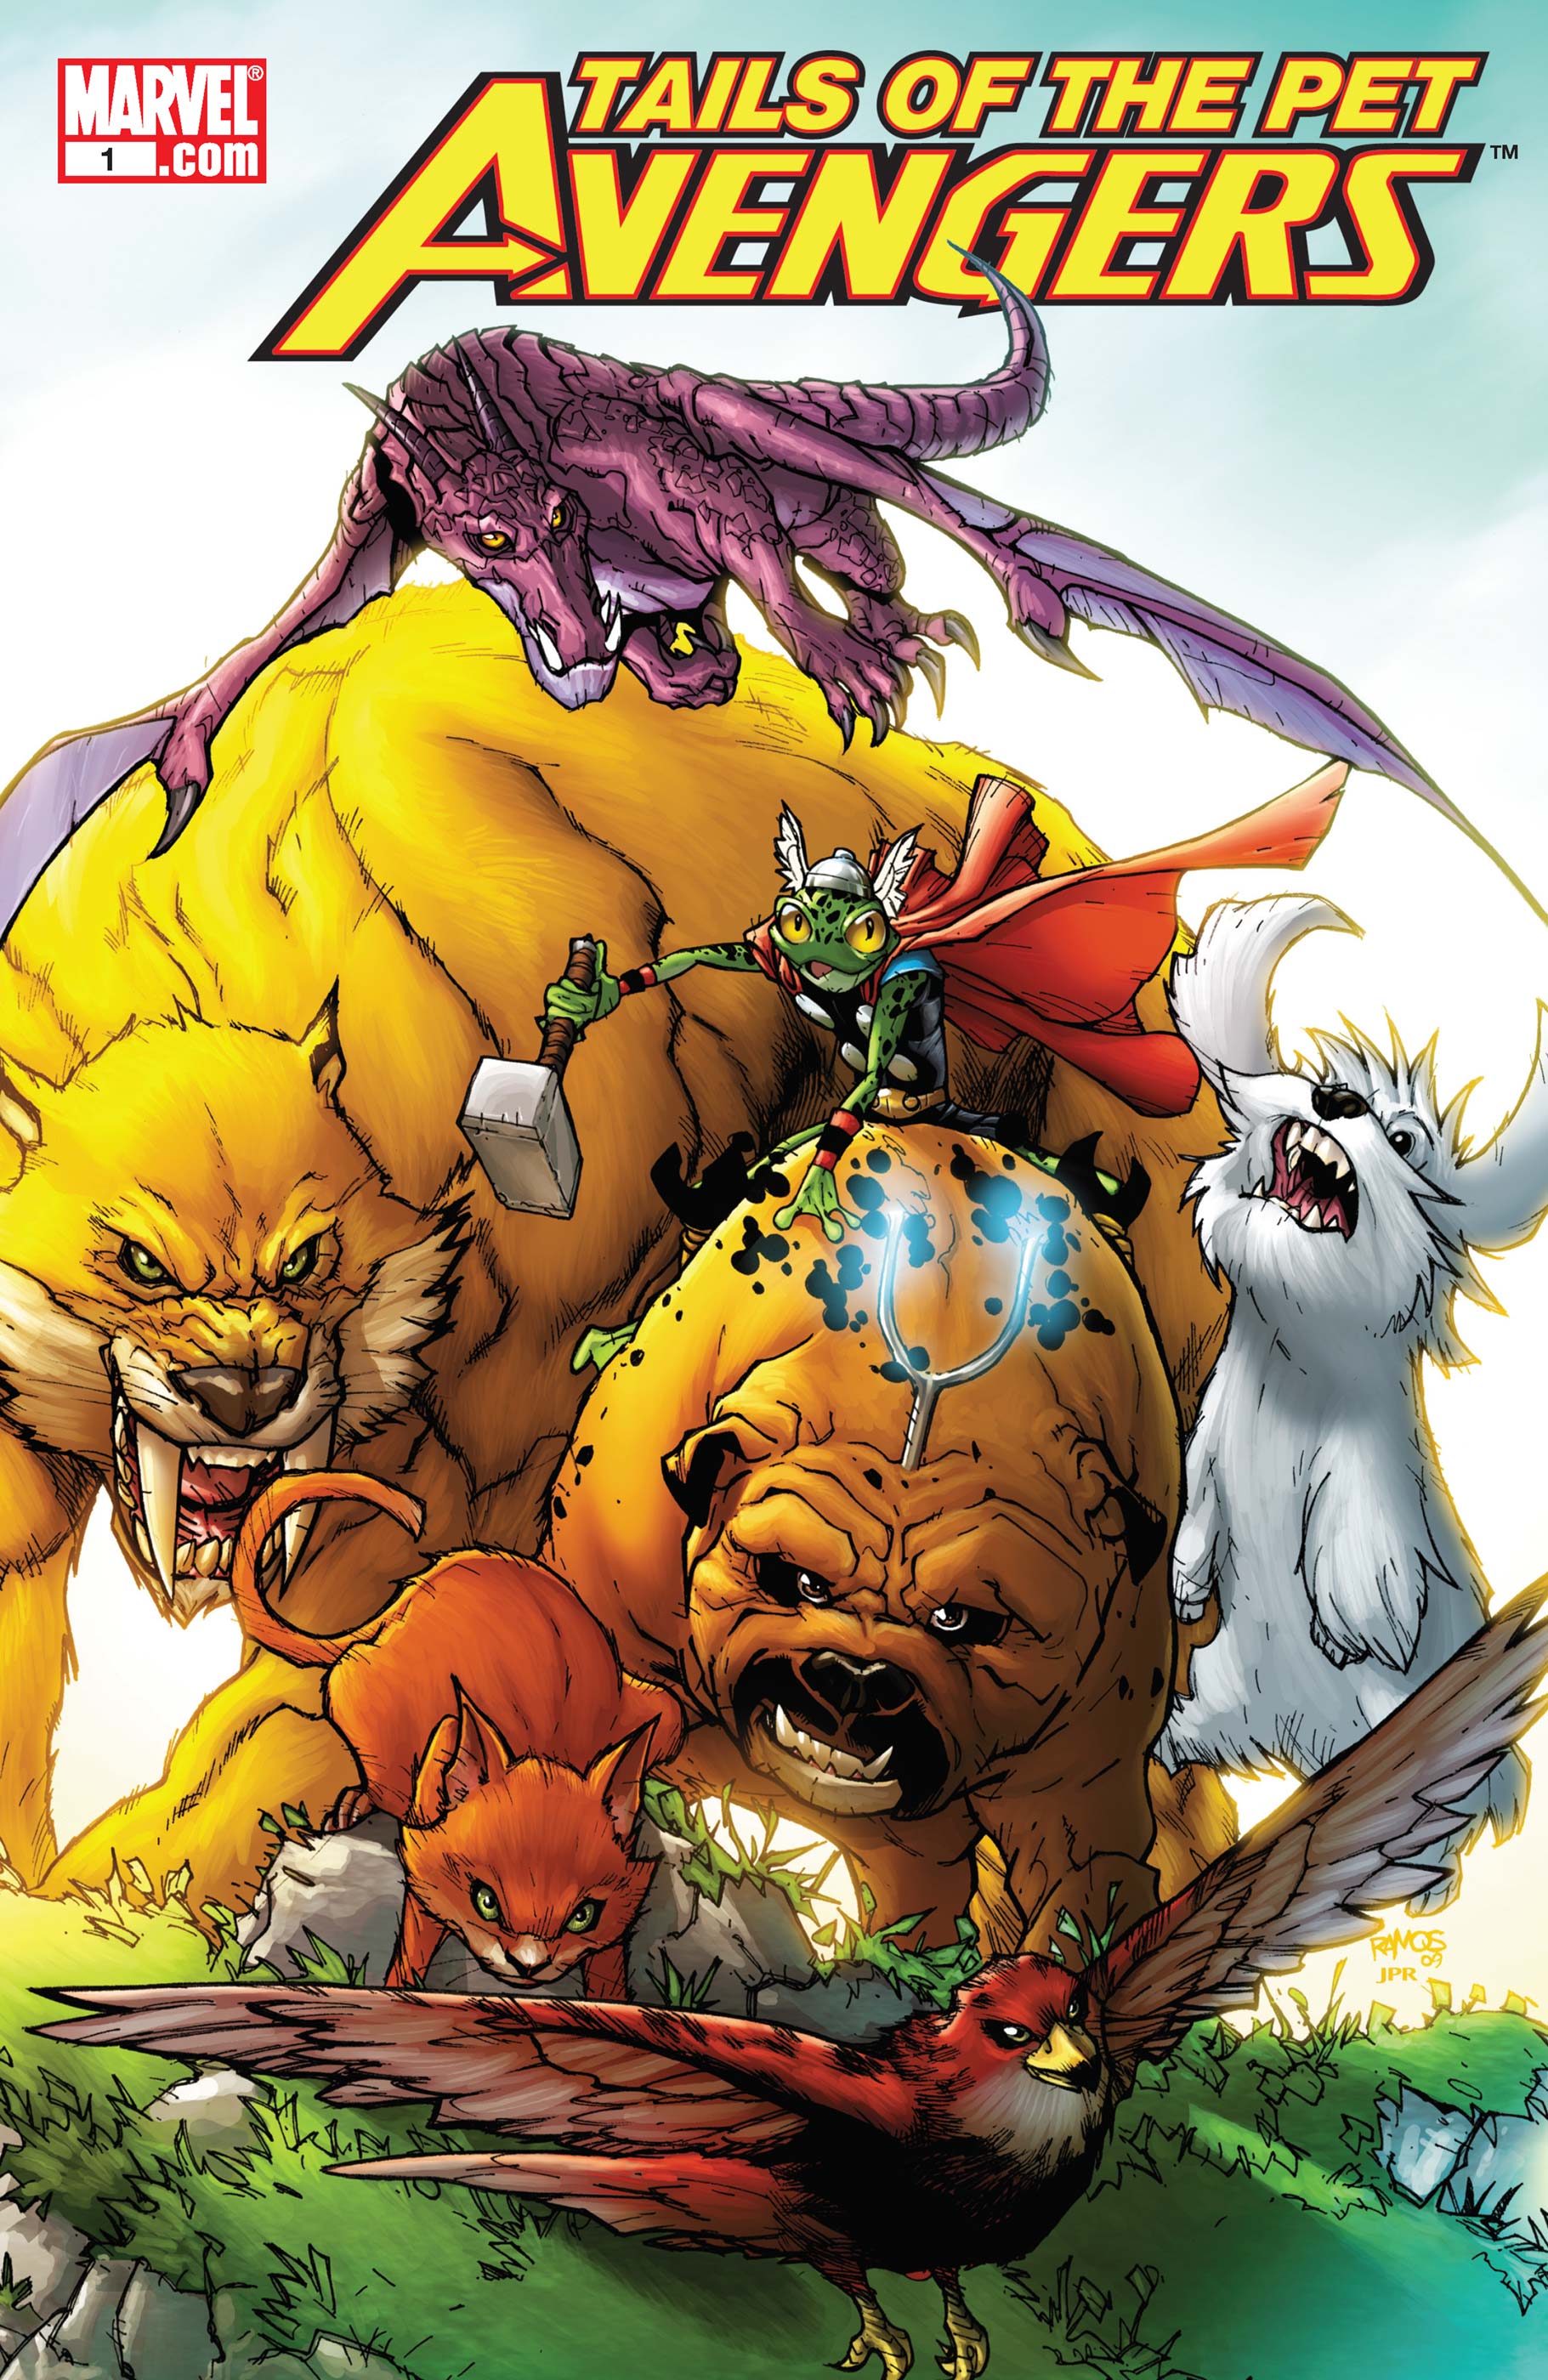 Tails of the Pet Avengers (2010) #1